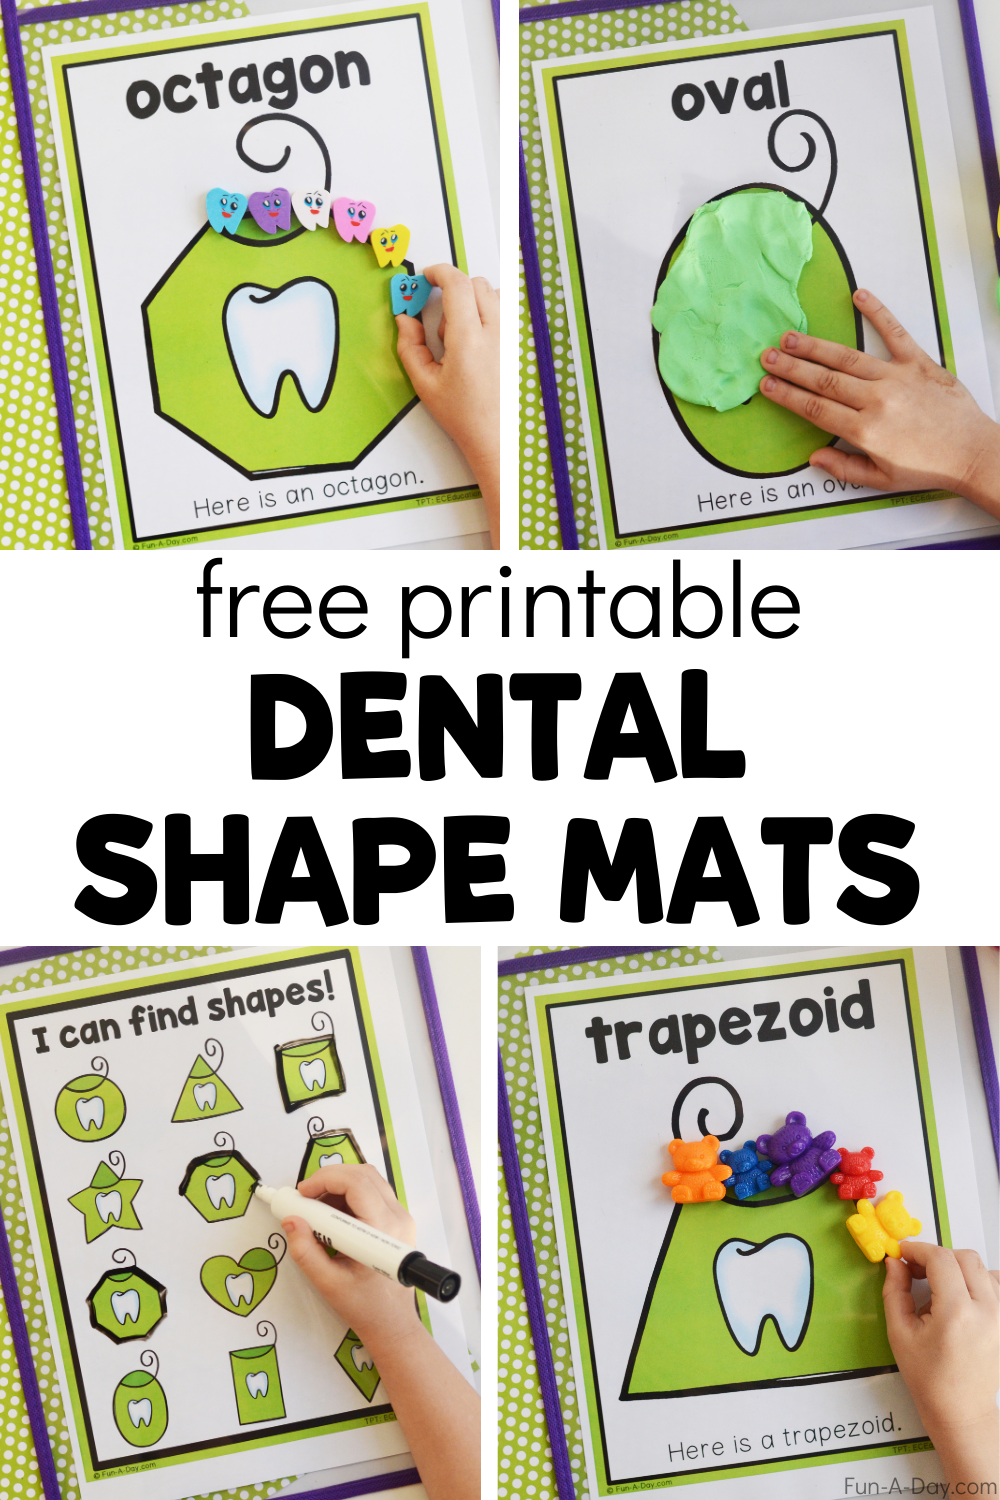 multiple uses of floss-themed printable with text that reads free printable dental shape mats